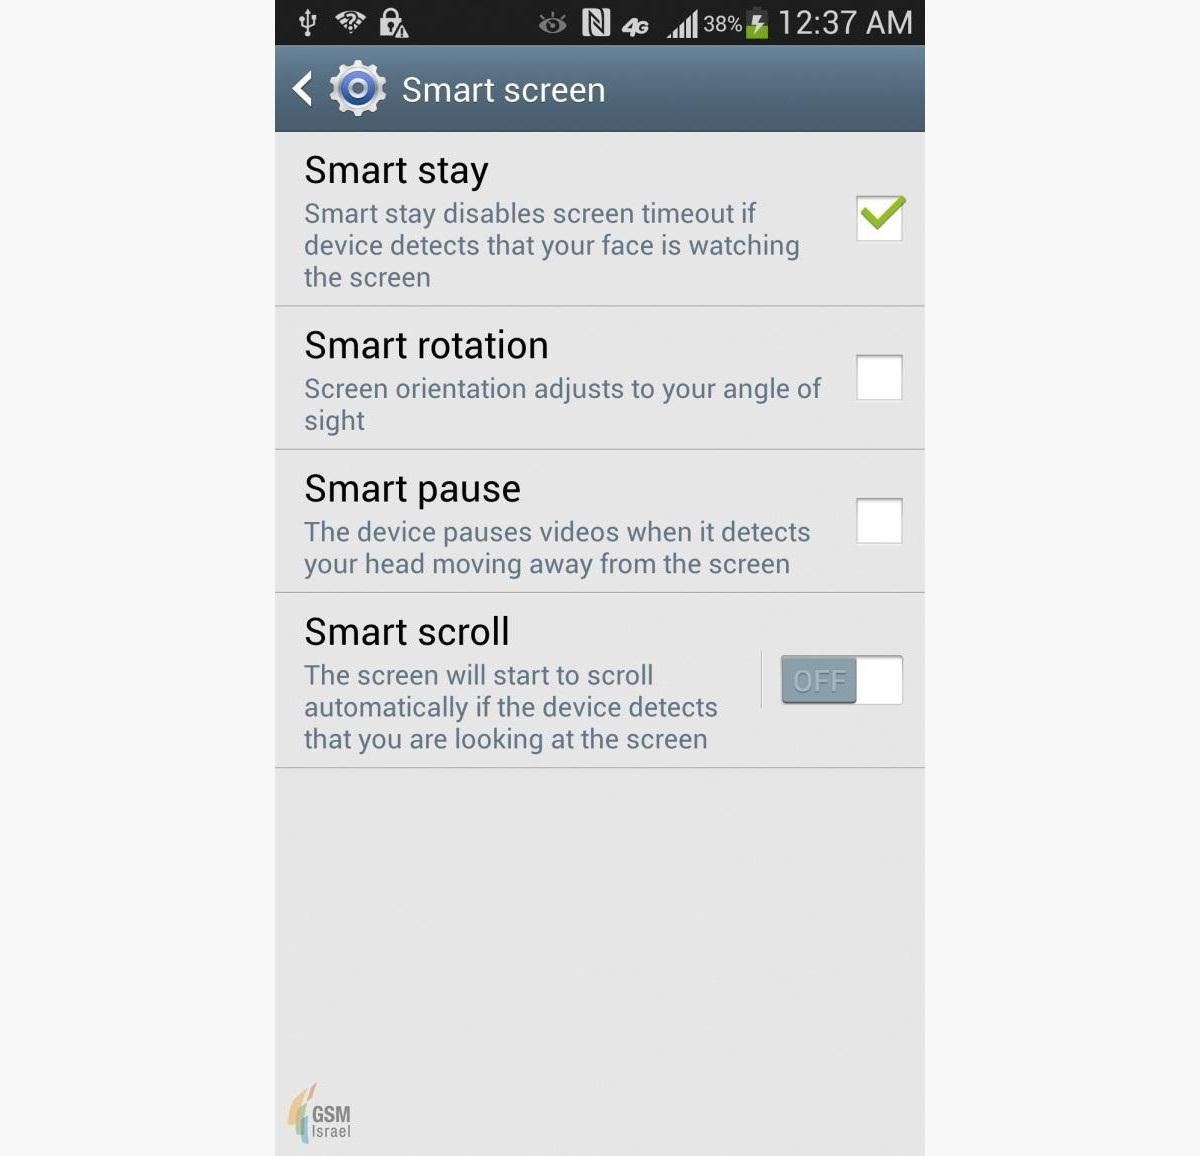 Leaked Screenshots of the Samsung Galaxy S3 Confirm "Smart" Features in GS4